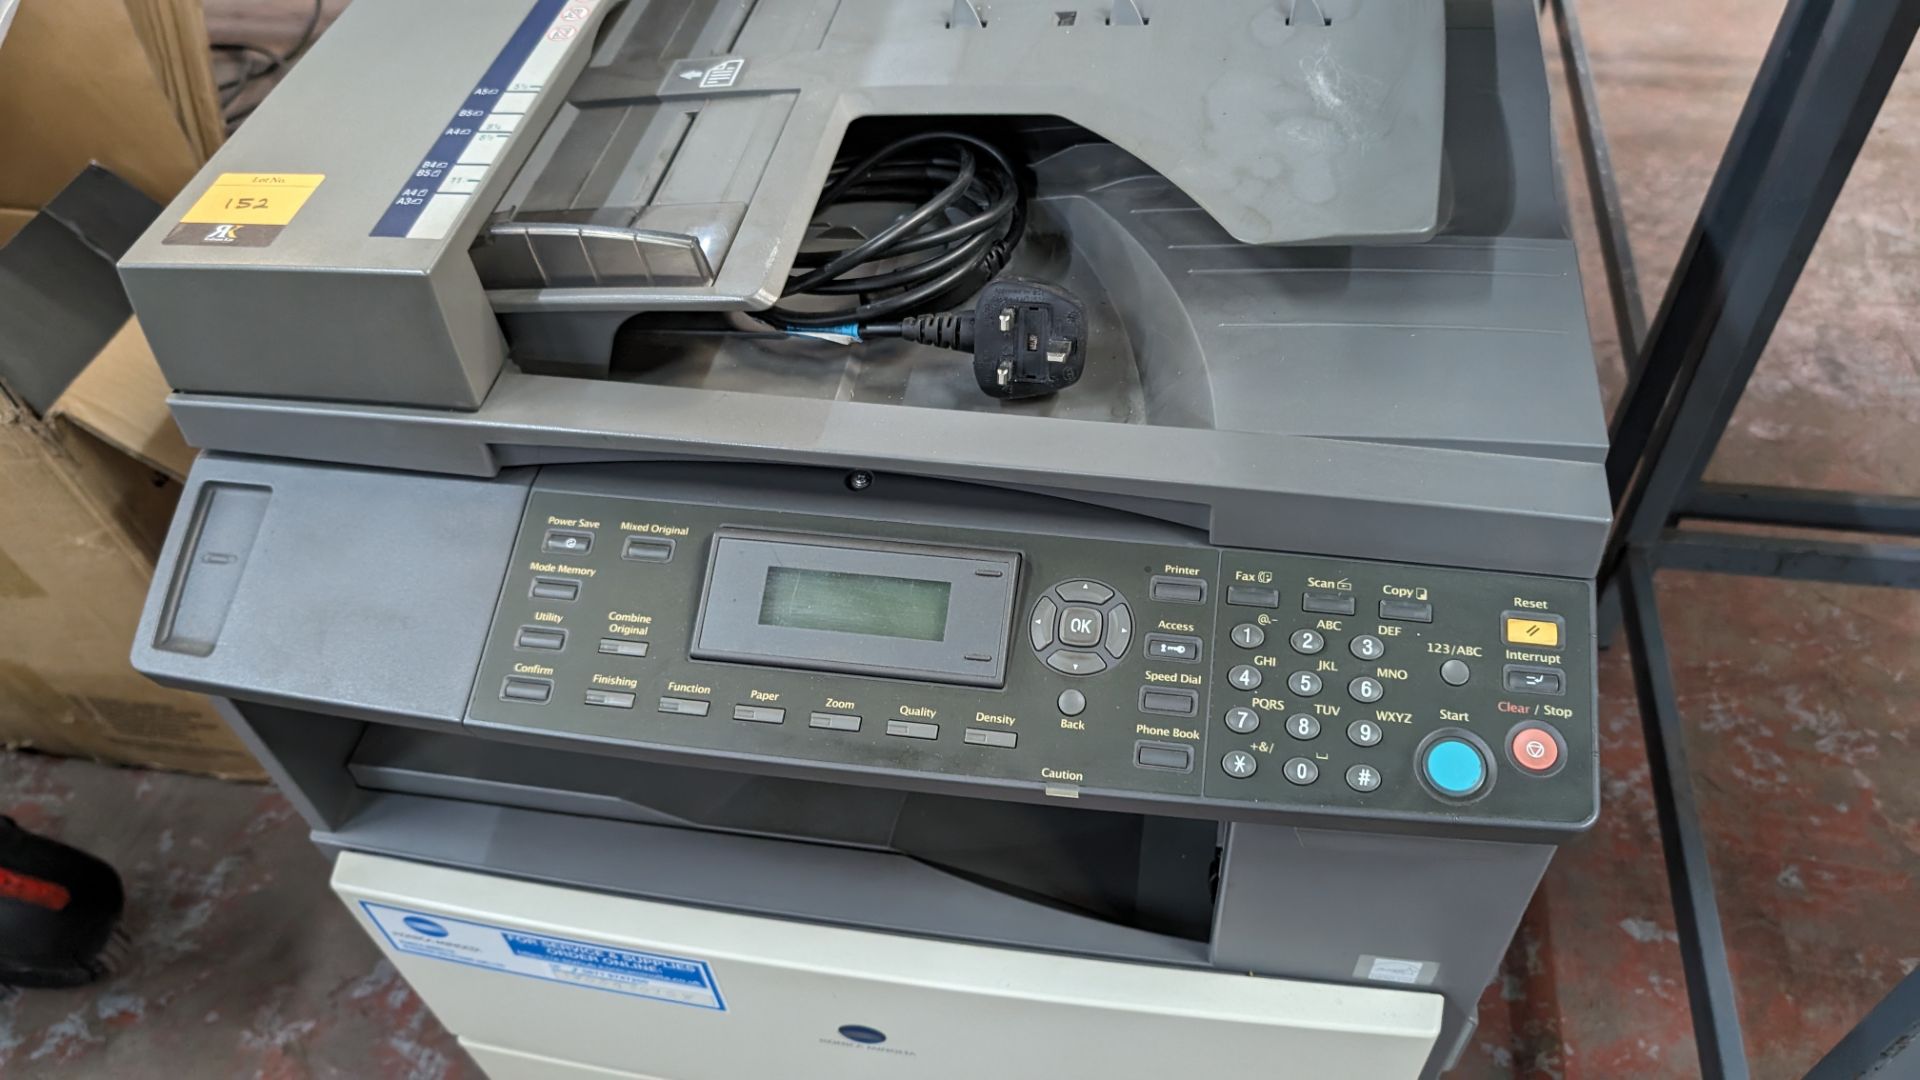 Konica Minolta Bizhub 163 copier. NB the wheeled dolly the copier is sat on is excluded - Image 4 of 9